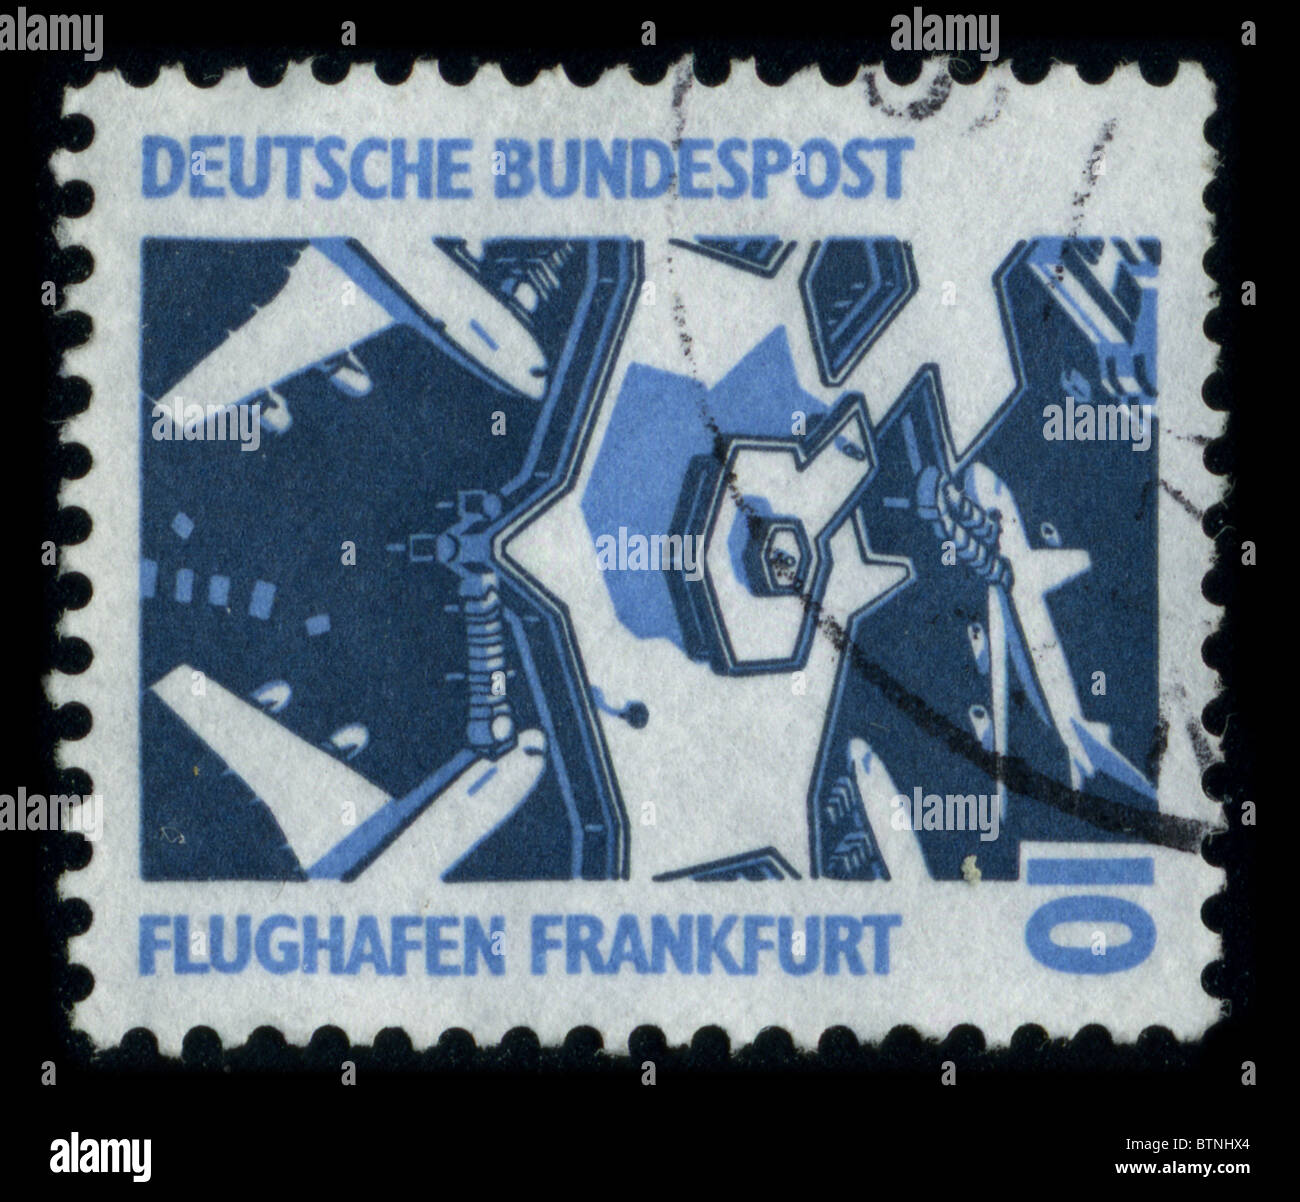 GERMANY - CIRCA 1980: A stamp printed in GERMANY shows image of the dedicated to the Frankfurt-Hahn Airport is a commercial airport located 10 km (6.2 mi) from the town of Kirchberg and 20 km (12 mi) from the town of Simmern in the Rhein-Hunsrück district of Rhineland-Palatinate to the west of central Germany, circa 1980. Stock Photo